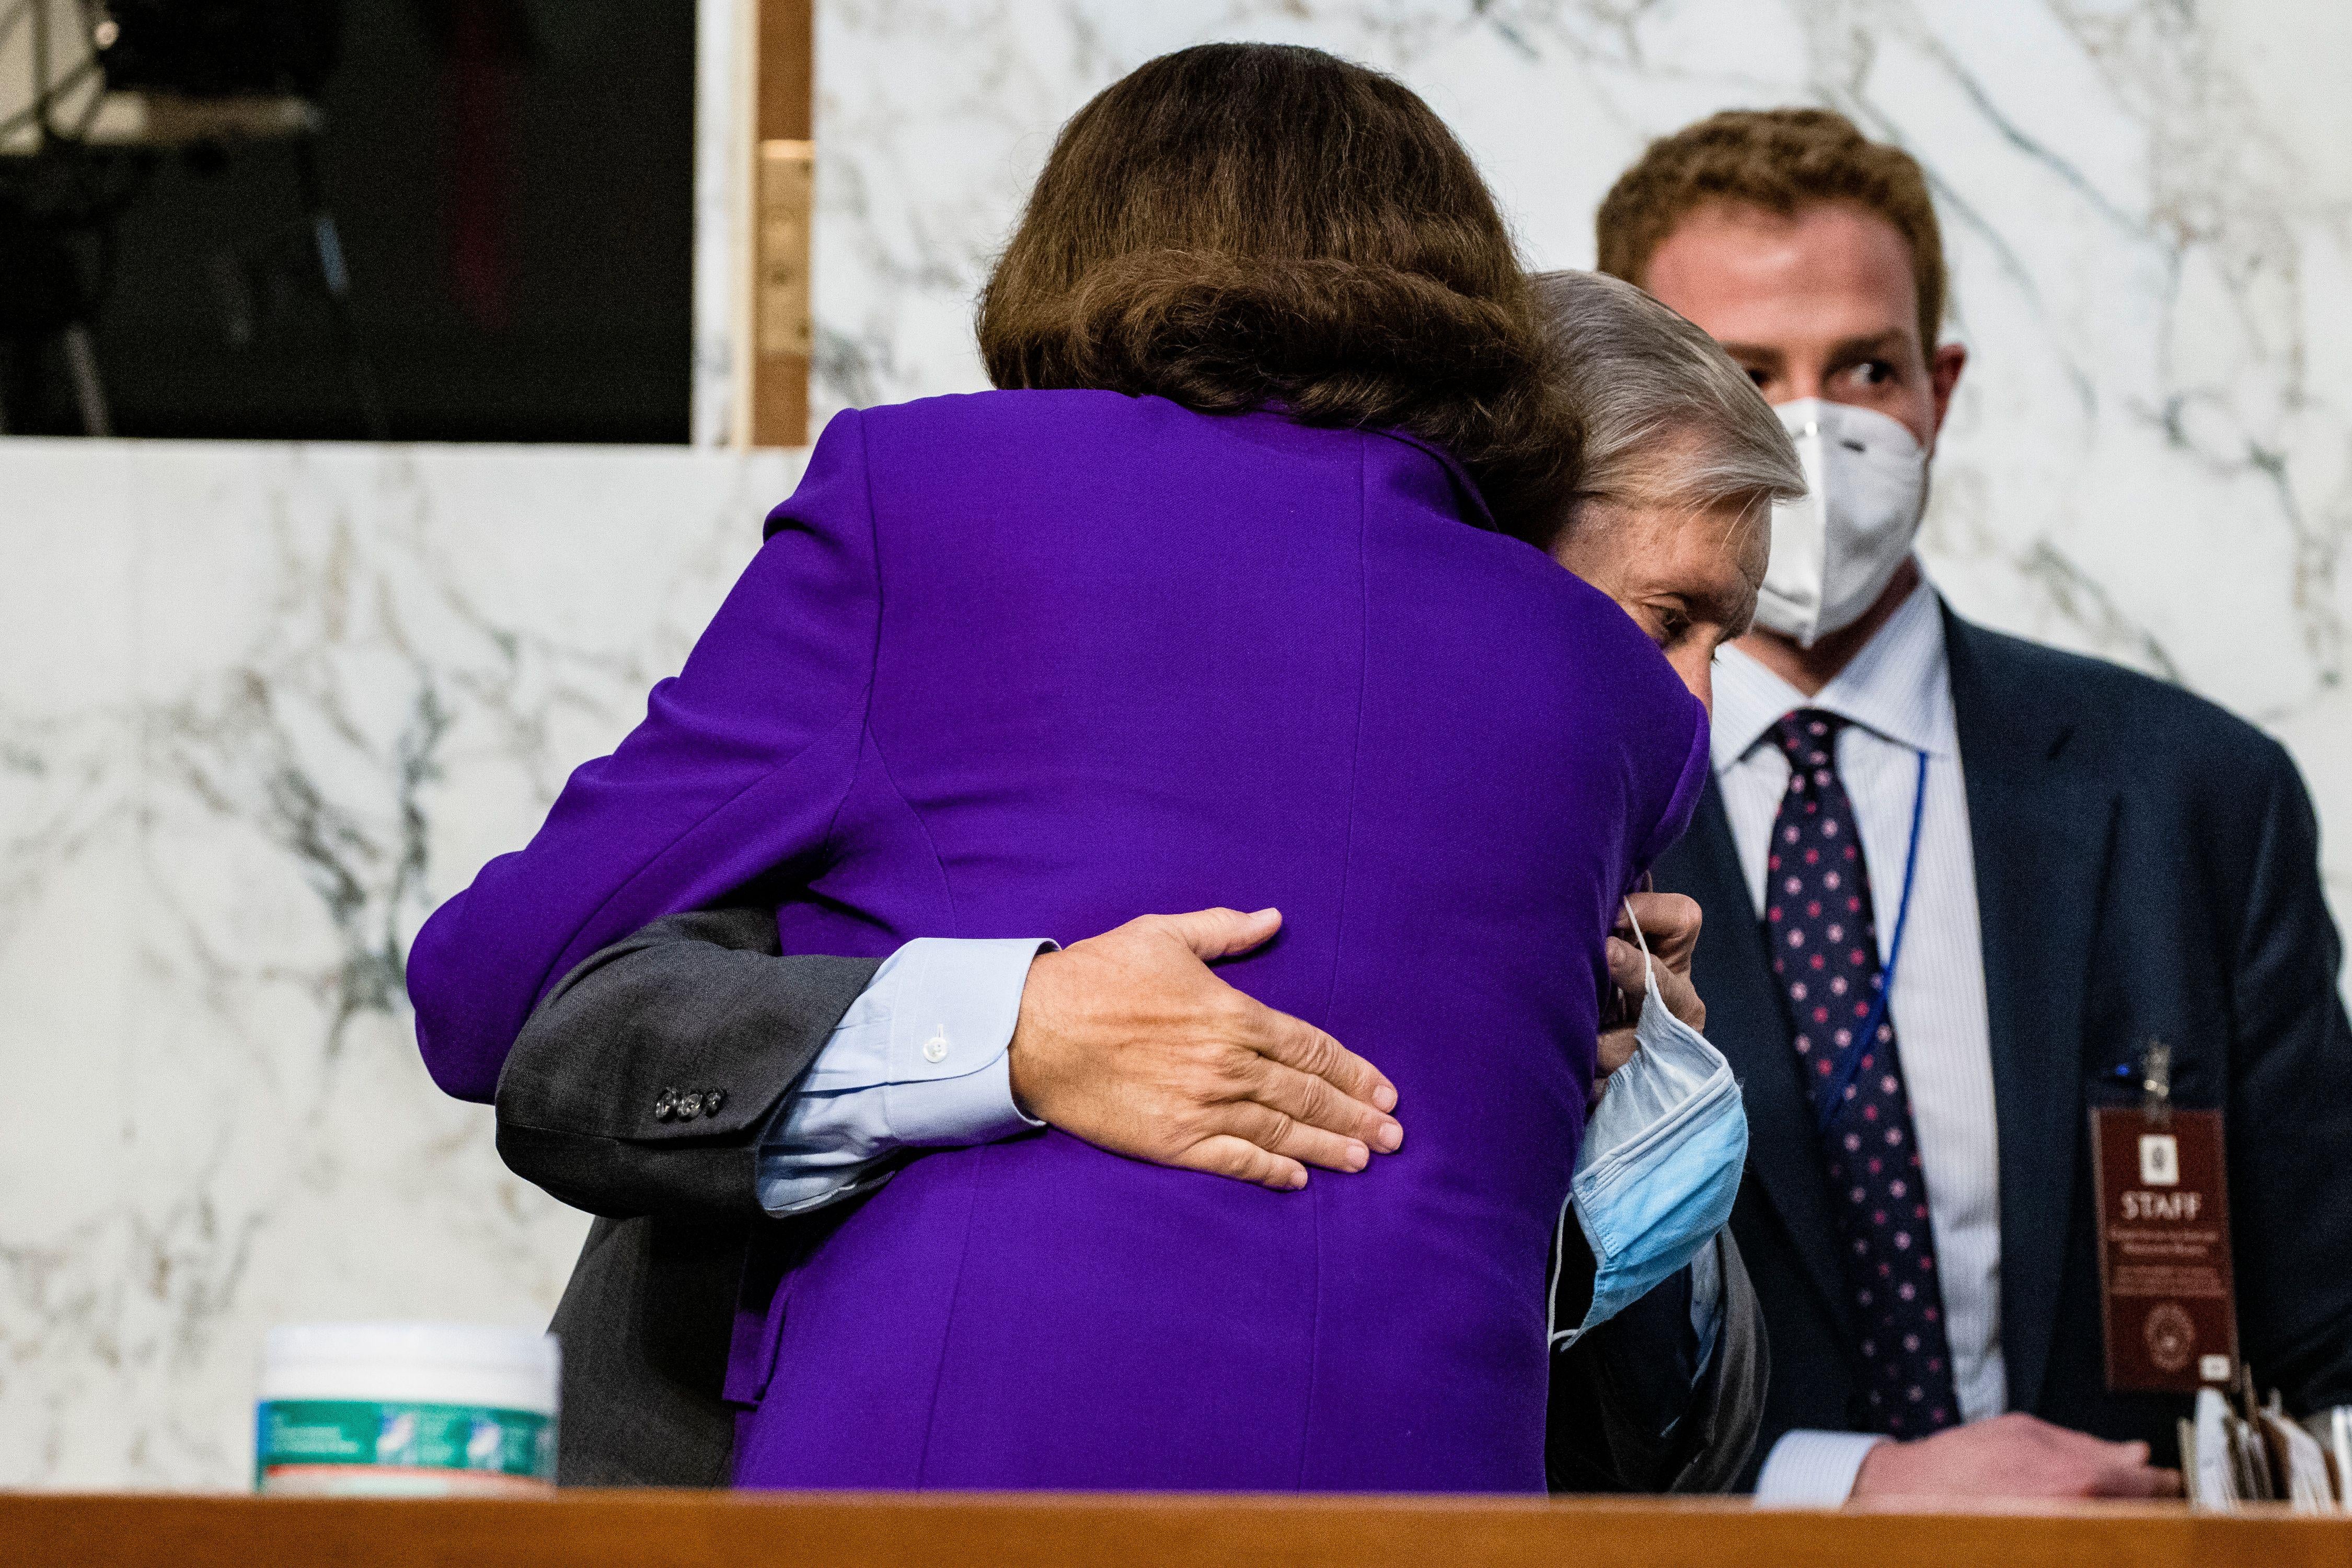 Dianne Feinstein hugs Lindsey Graham, who is holding is mask in his hand.